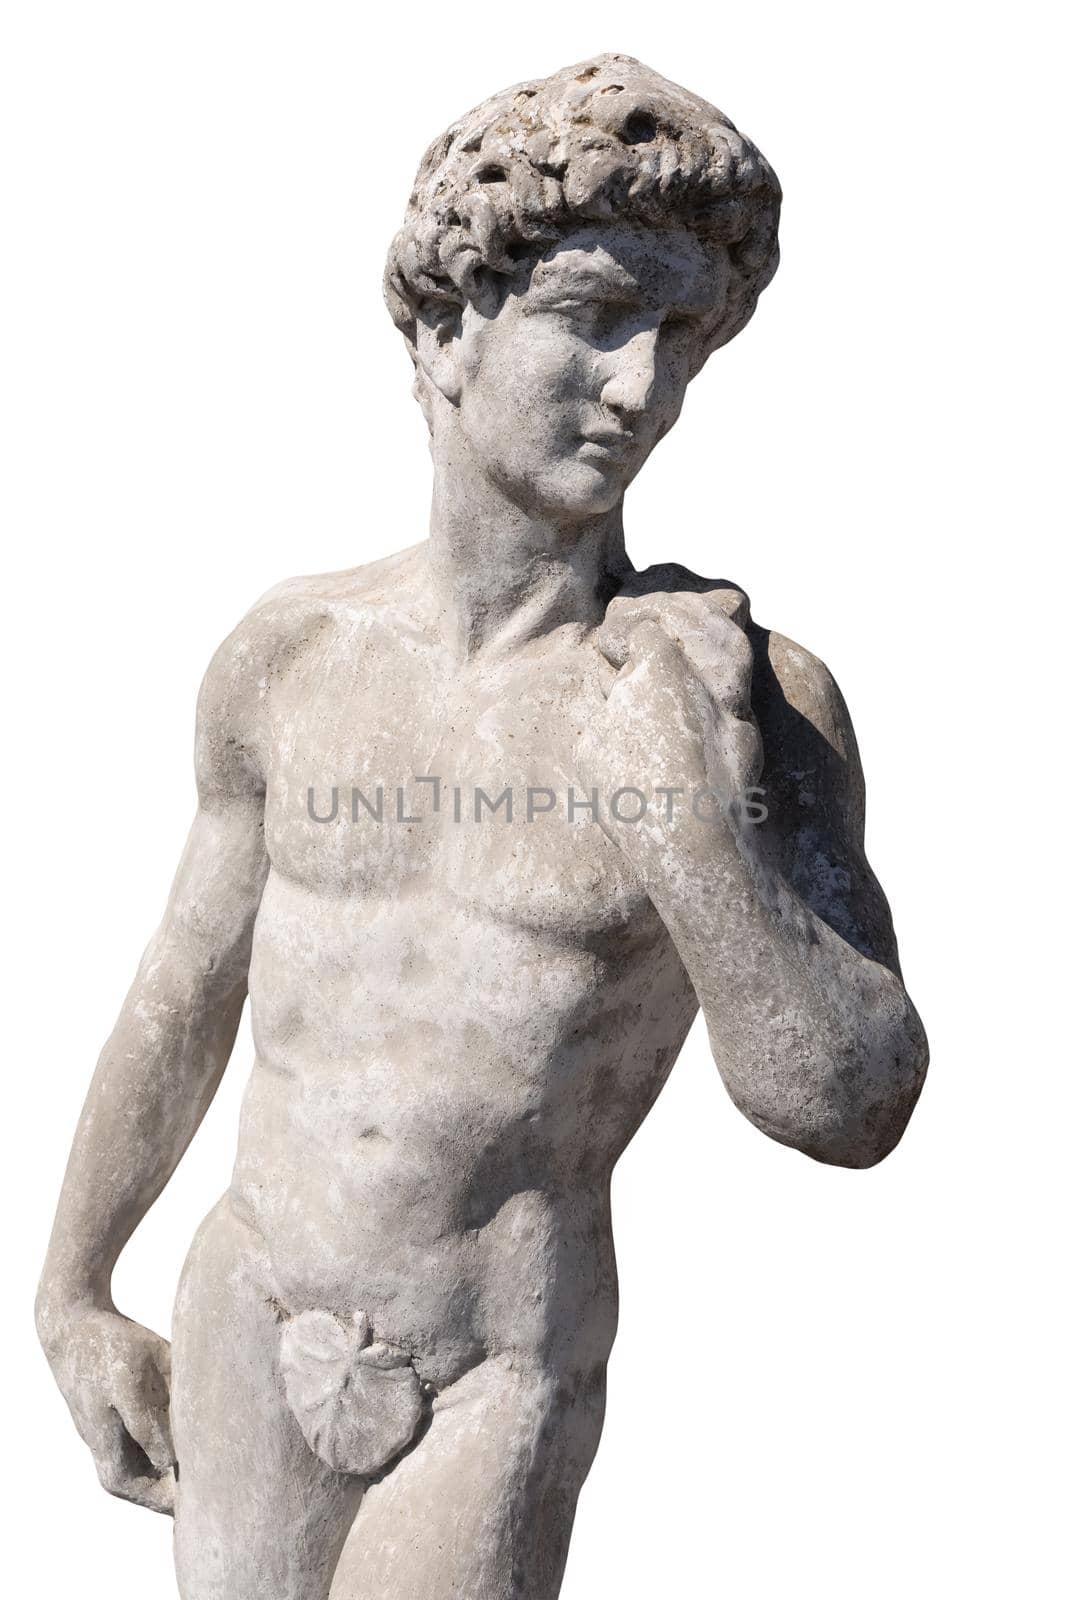 Ancient stone sculpture of naked man on white background. art and classical style romantic figurative stone sculpture.